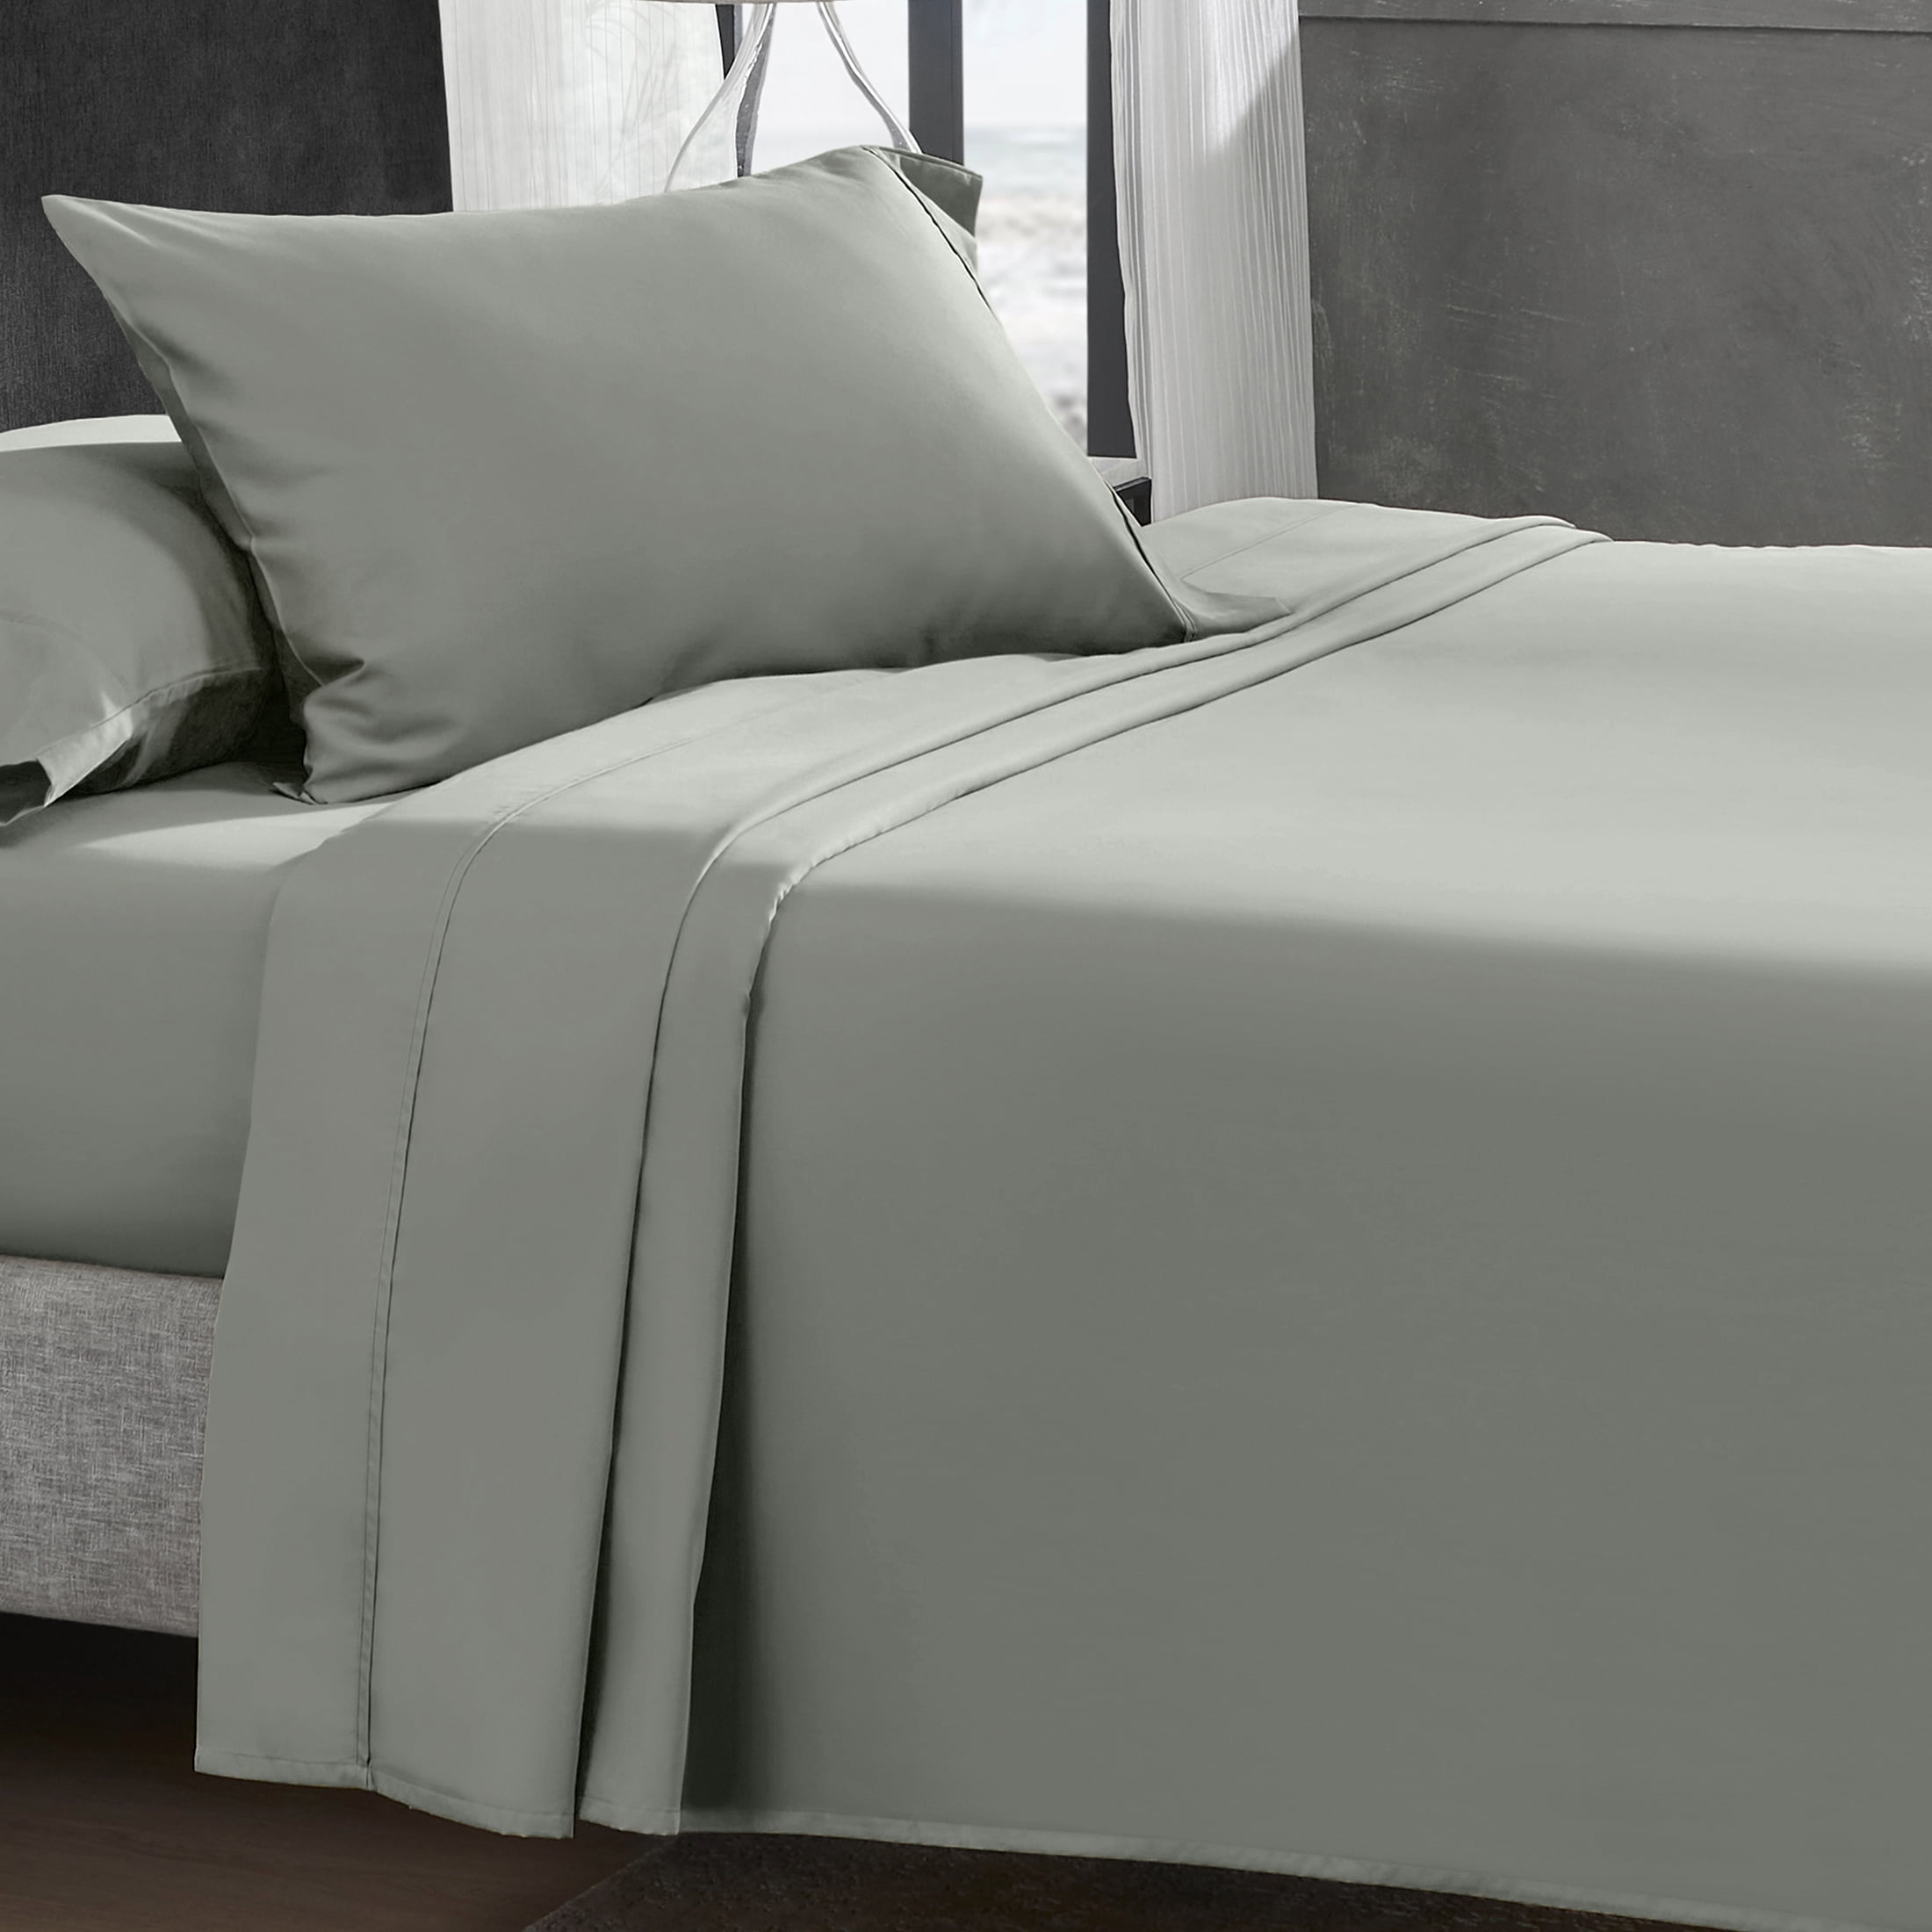 Details about   600 Thread Count 100% Long Staple Soft Cotton White Bed Sheet Set Sateen Weave 